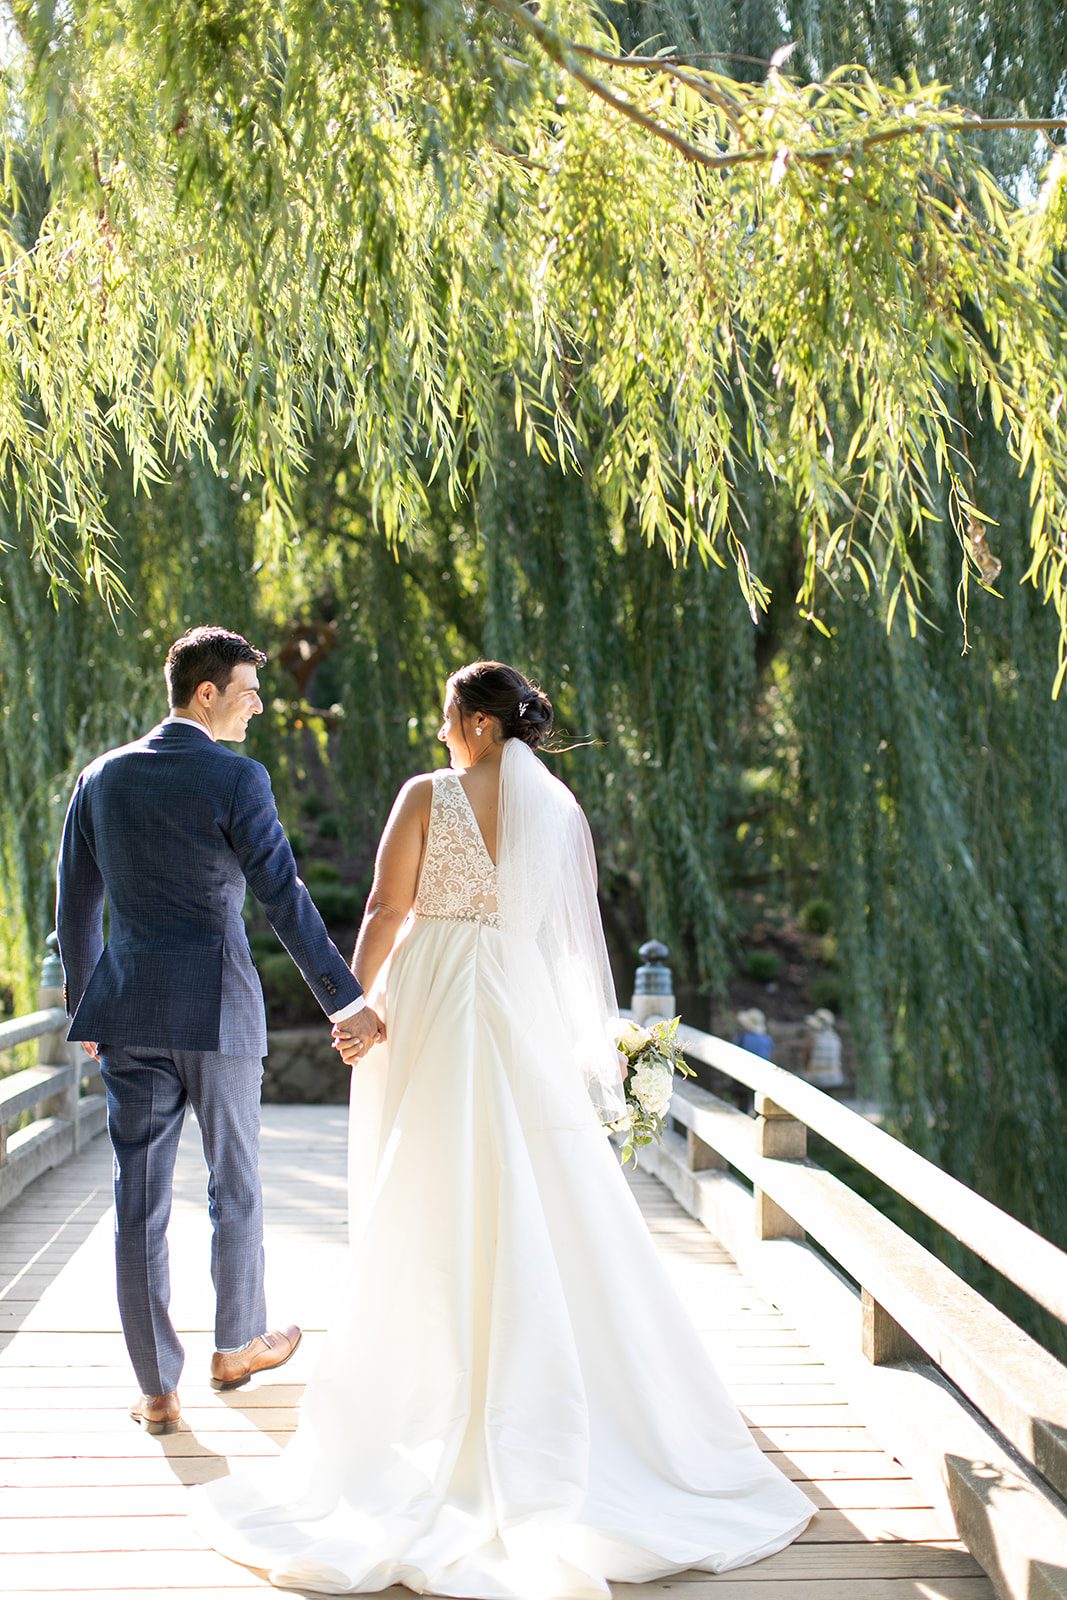 Bride and groom cross bridge surrounded by willow trees at Chicago Botanic Garden